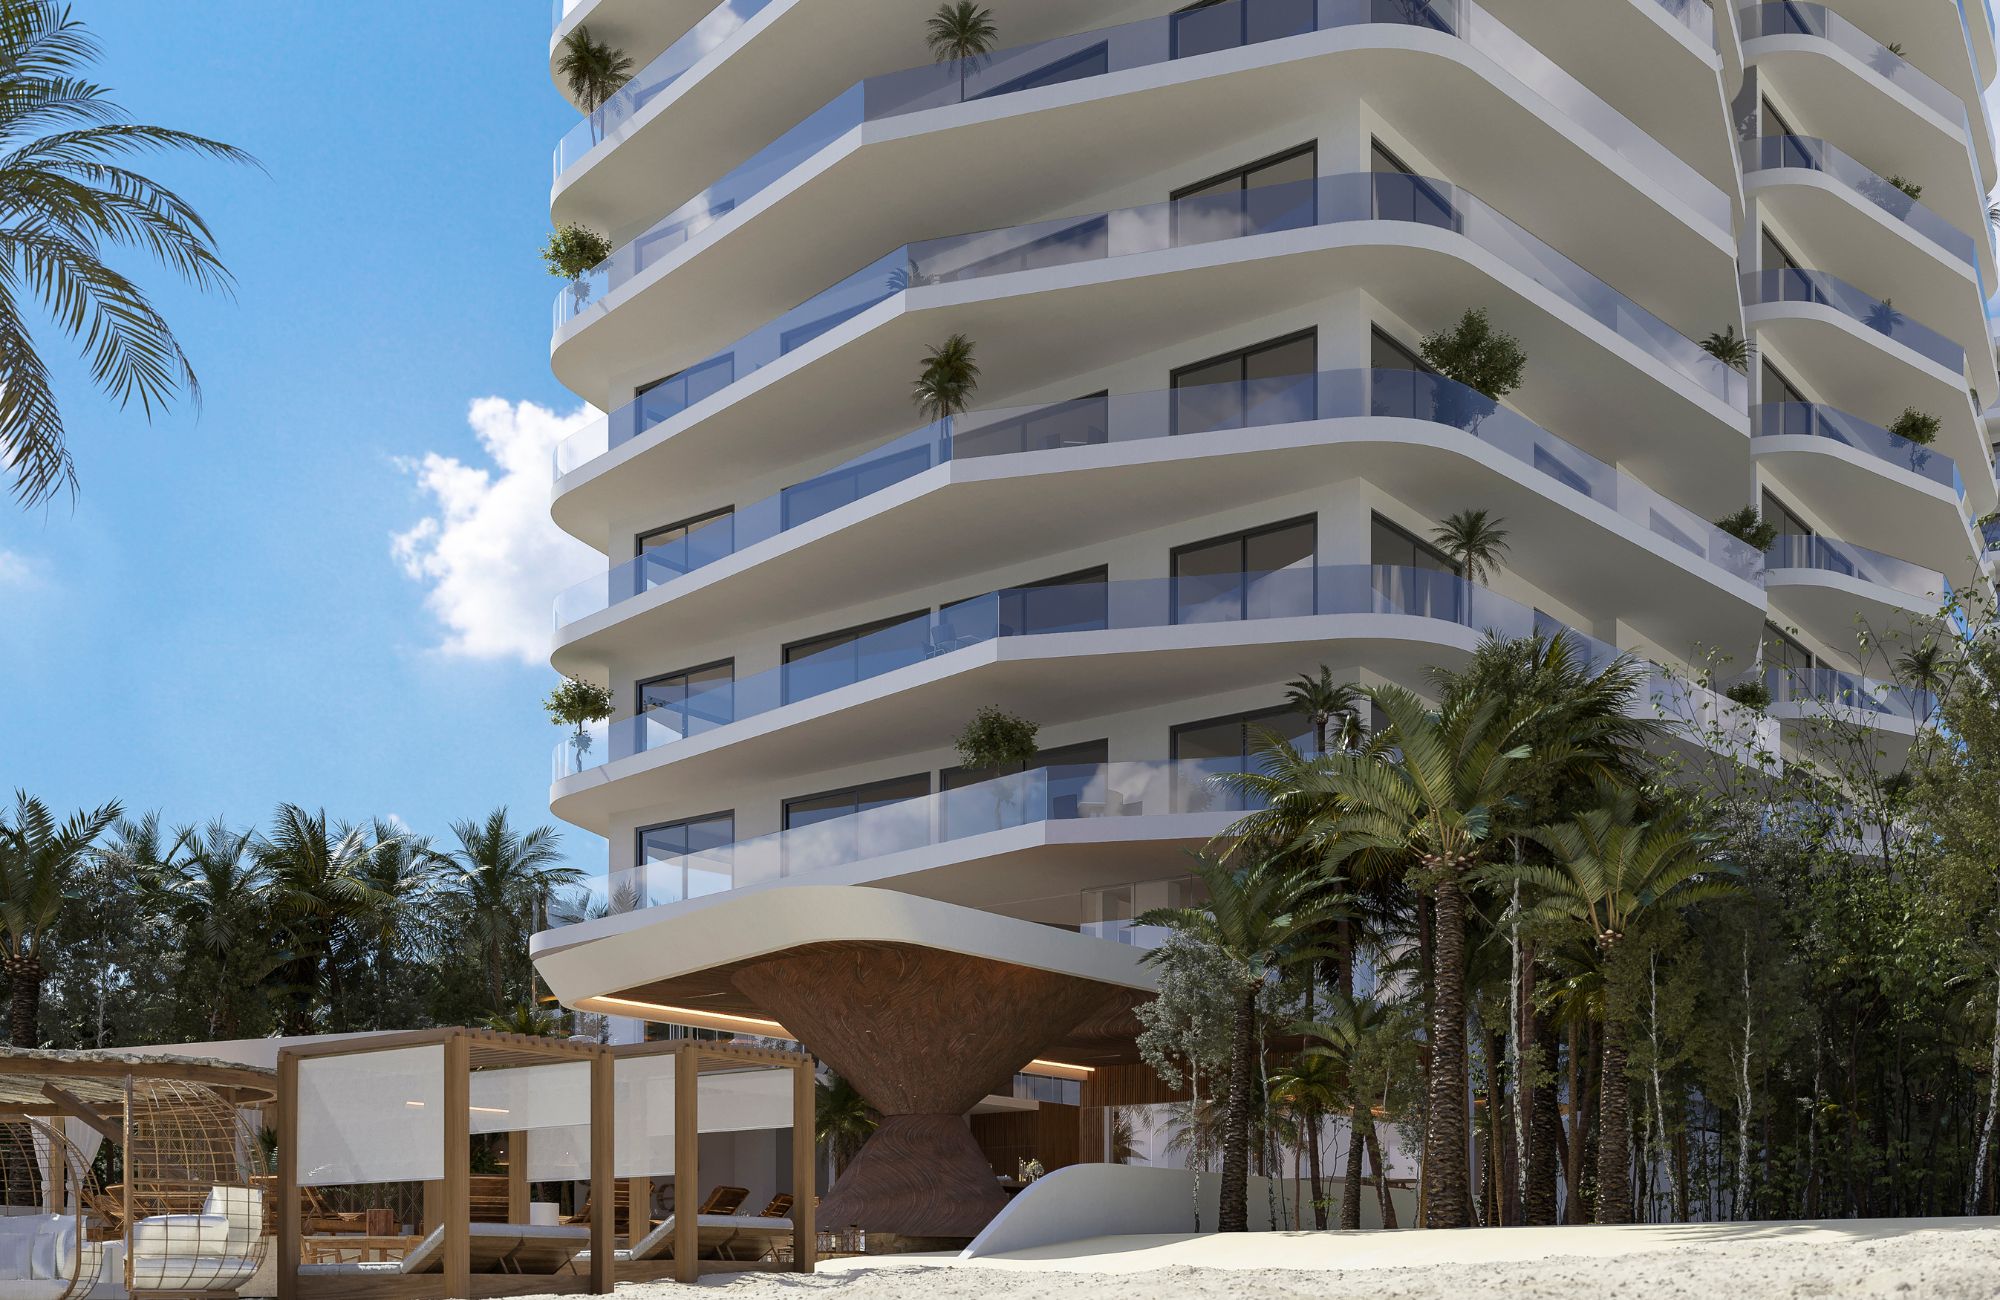 Condo with panoramic view, infinity pool, jacuzzi, snack bar, service room, pre-construction, in Puerto Cancun.